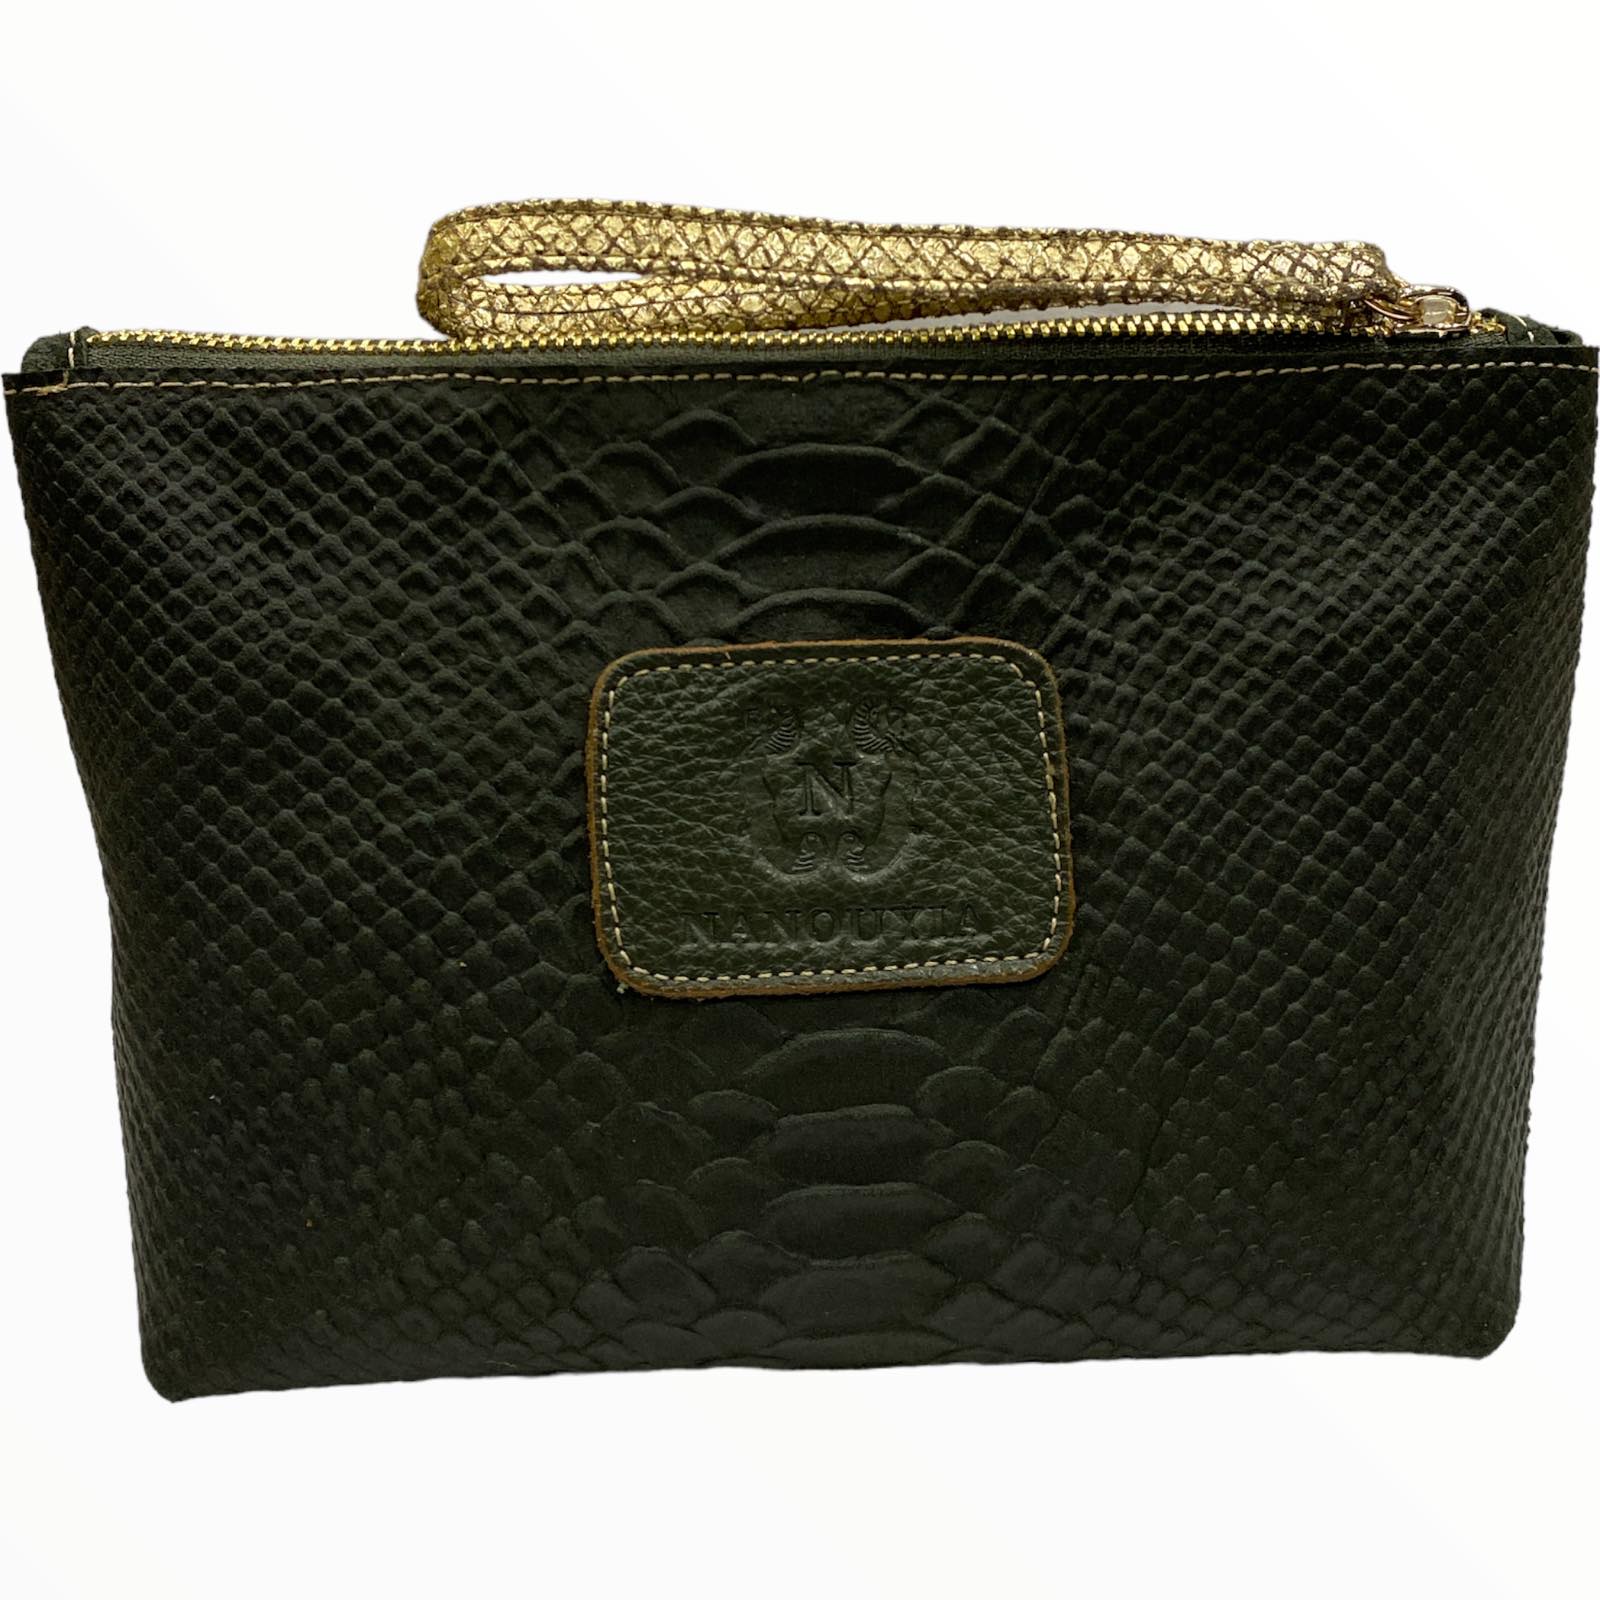 Forest green anaconda-print leather beauty case